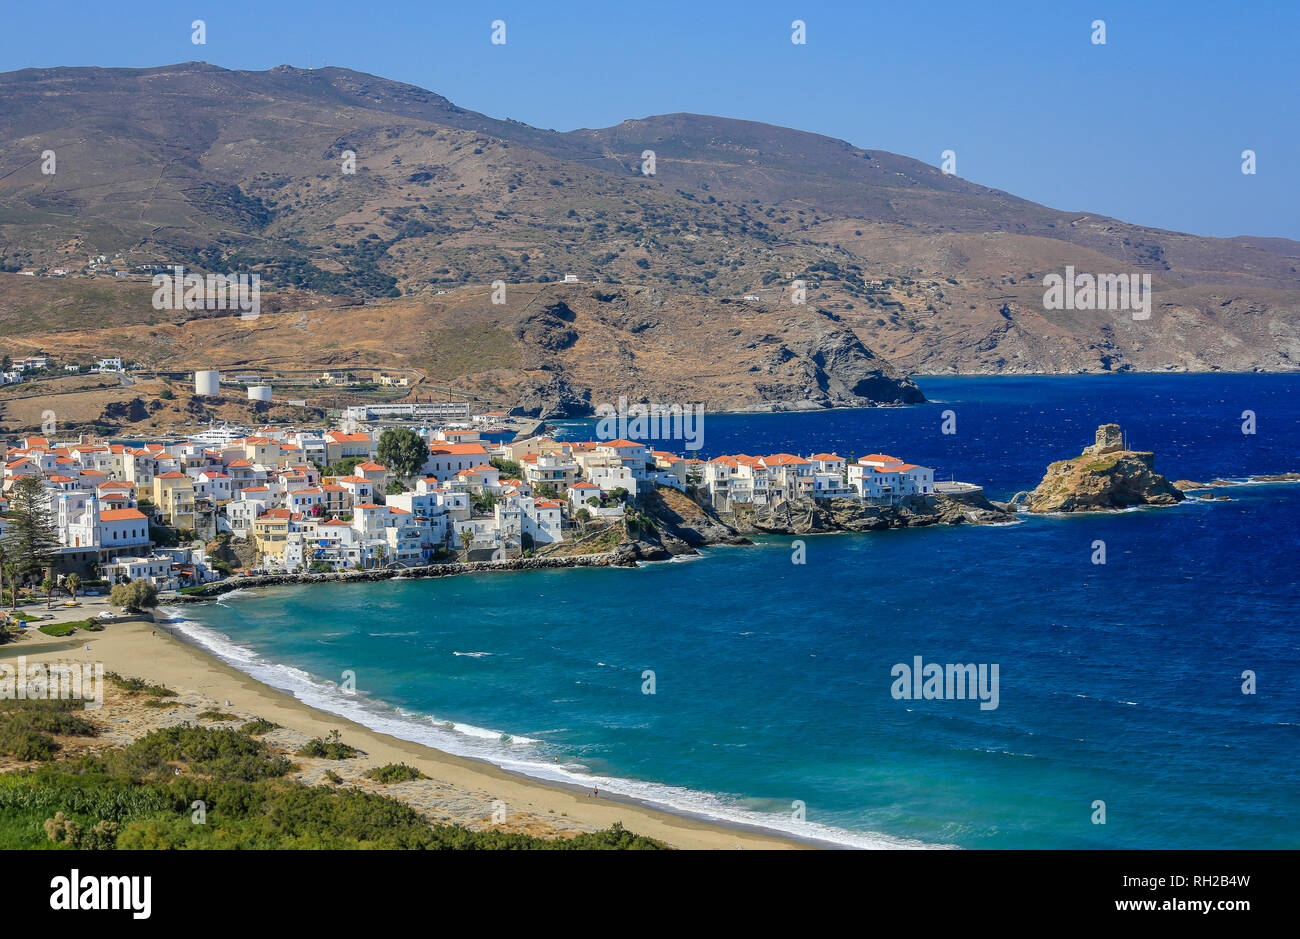 Ville de l'île Andros, Andros, Cyclades, Grèce - Paysage côtier avec la capitale (Chora) Andros. Andros-Stadt, Insel Krk, Andros, Grèce Banque D'Images